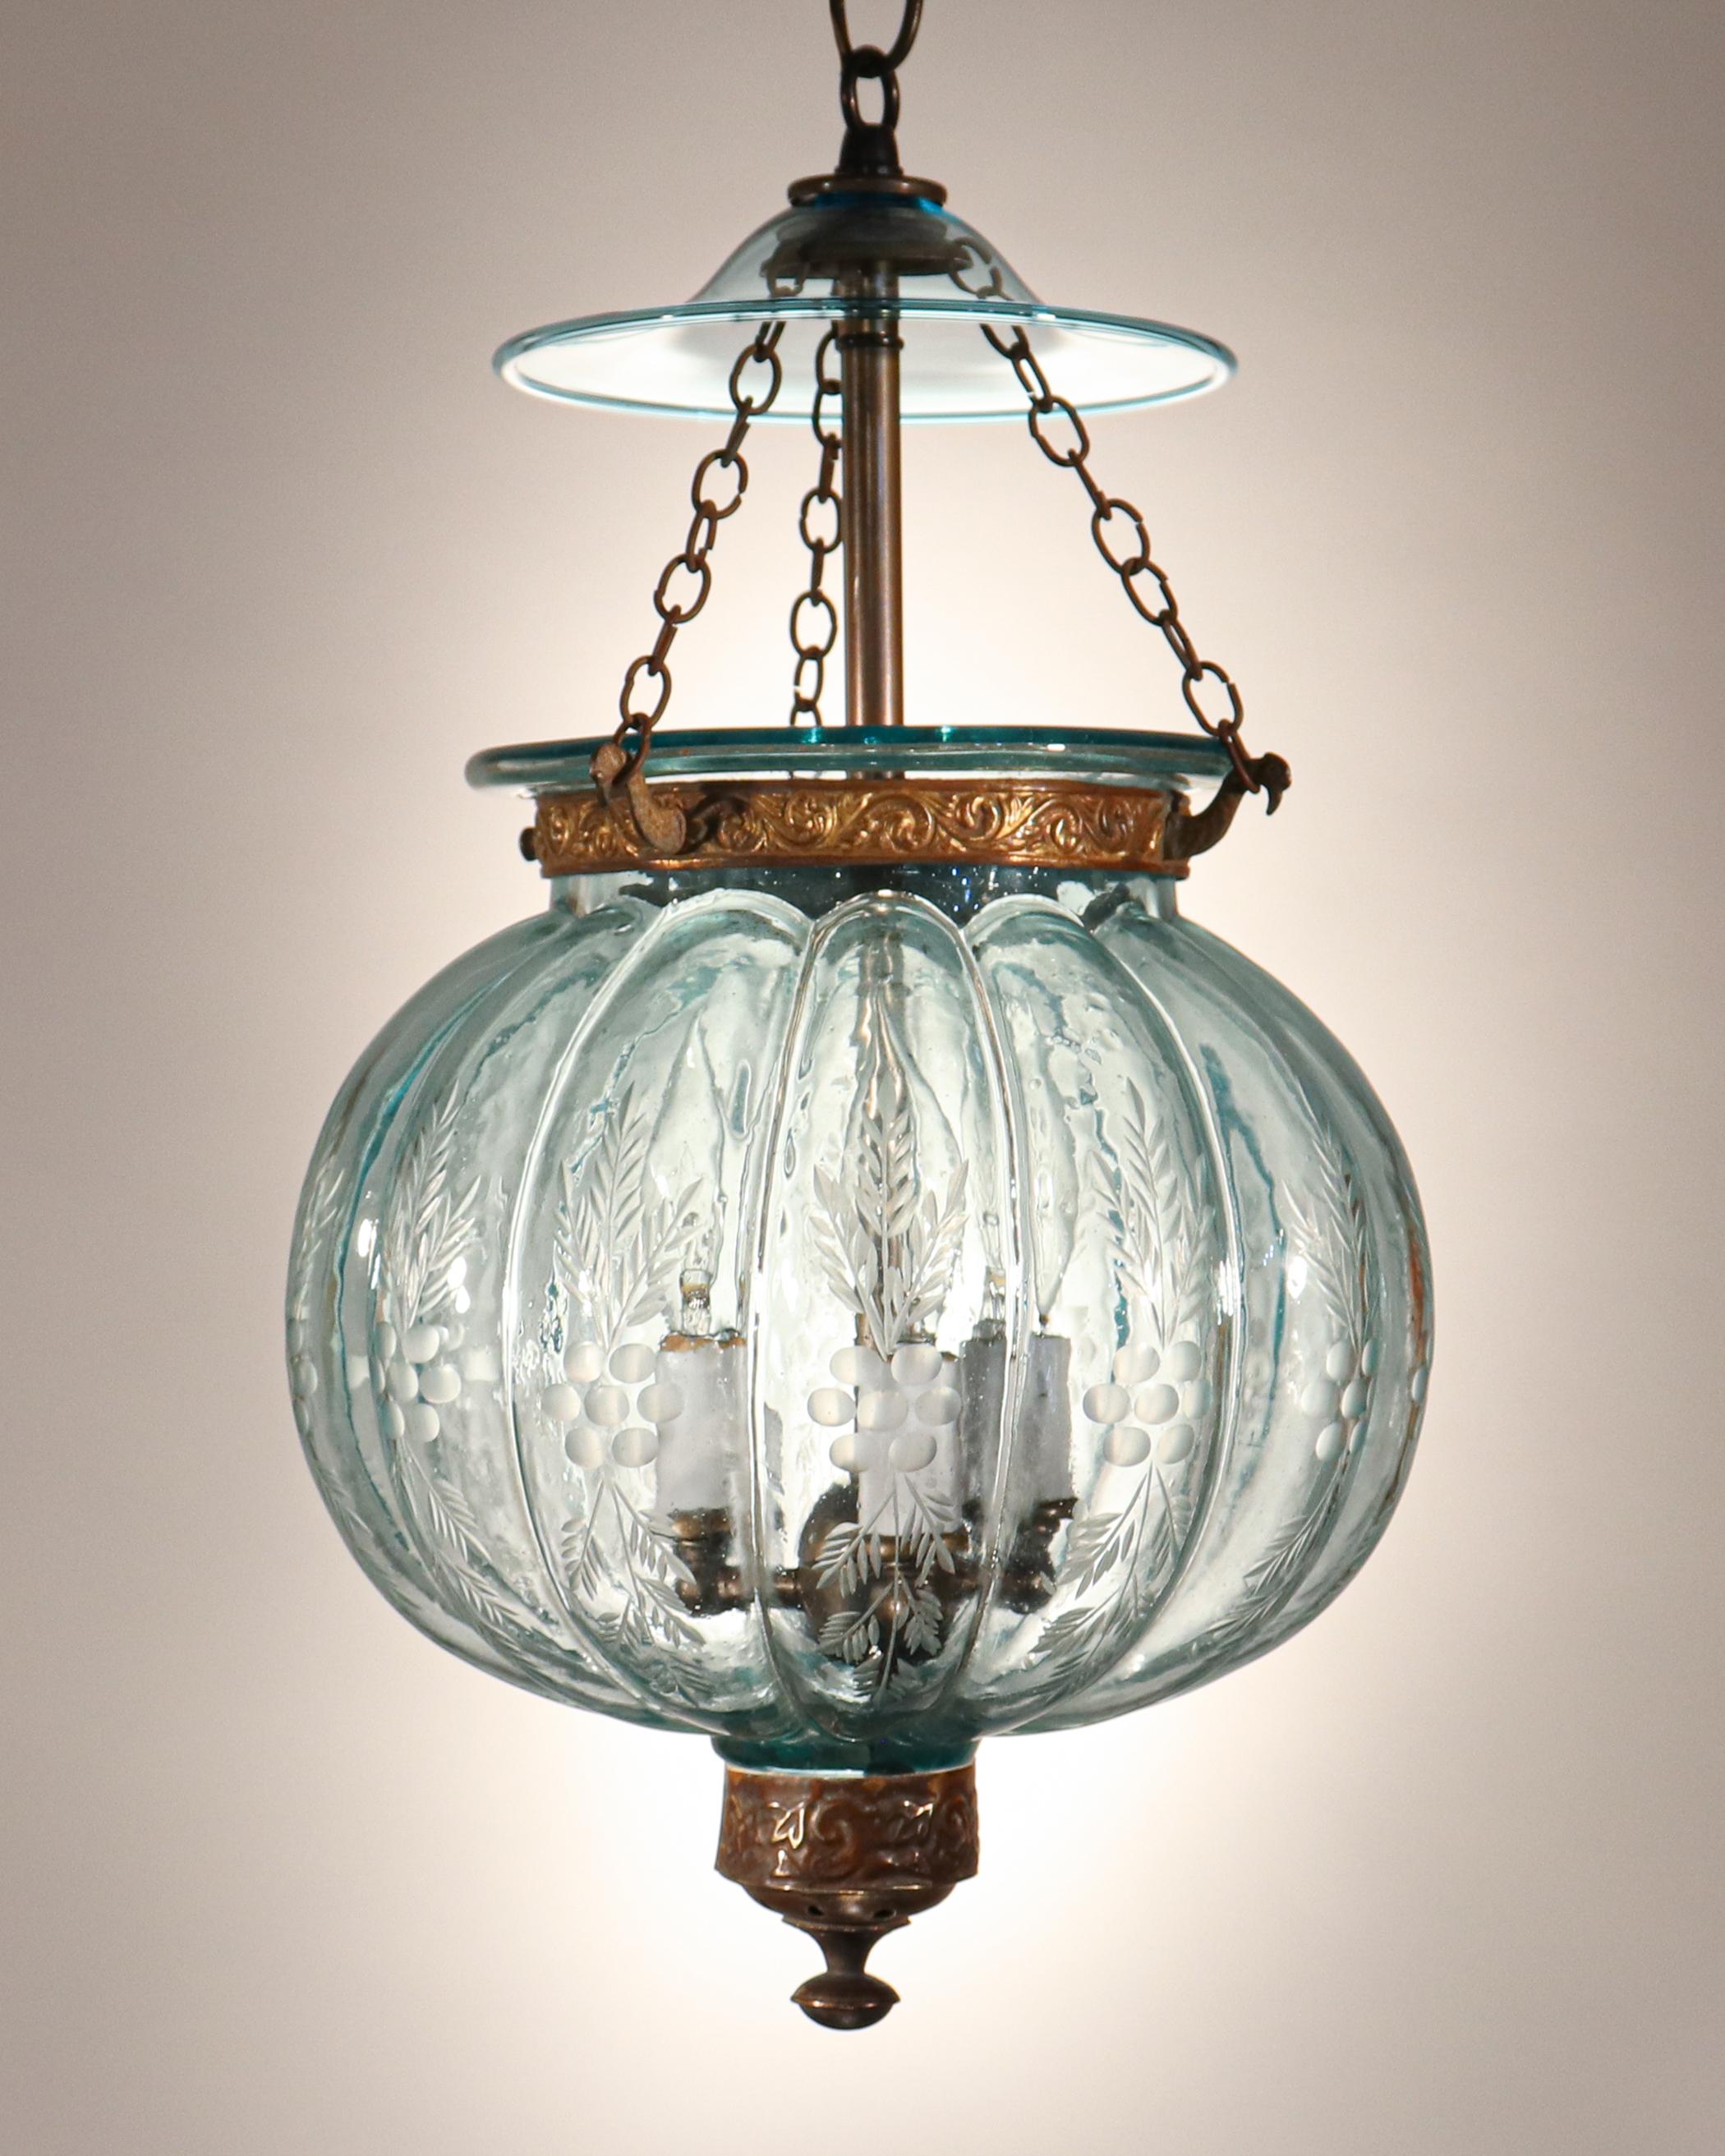 A rare antique Belgian melon bell jar lantern with a beautiful aqua-blue tint. The lantern features excellent quality hand blown glass and a finely etched wheat motif. The brass band and finial are original to the lantern; however, the hand blown